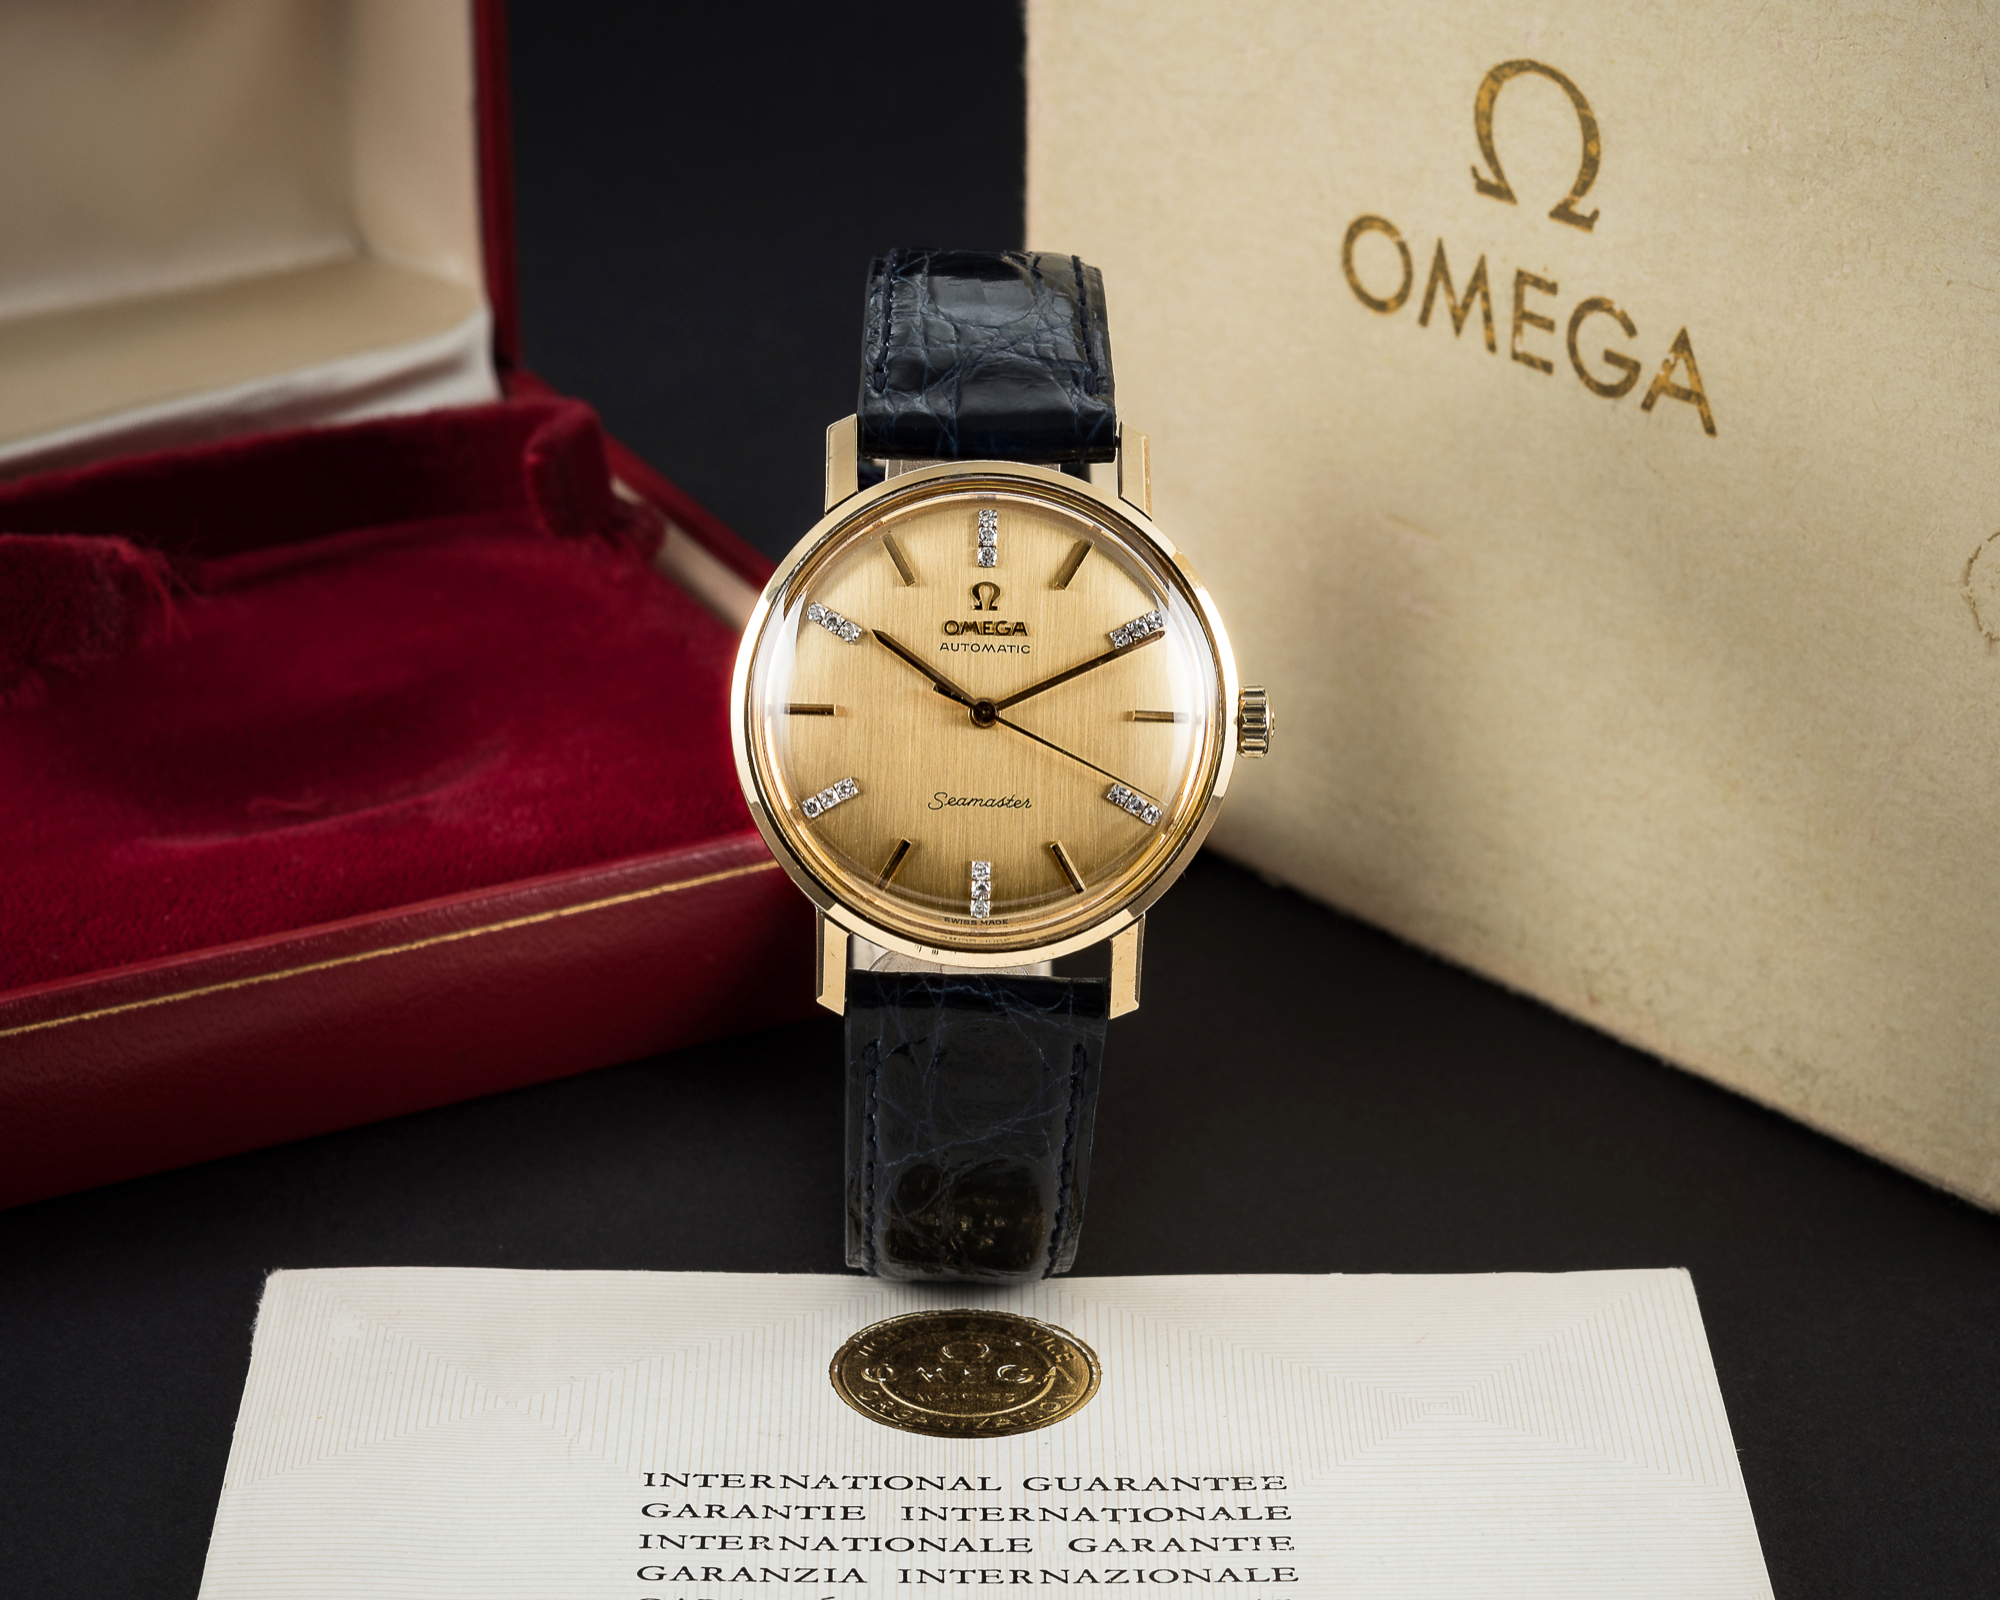 A FINE & RARE GENTLEMAN'S 18K SOLID GOLD & DIAMOND OMEGA SEAMASTER WRIST WATCH DATED 1966, WITH